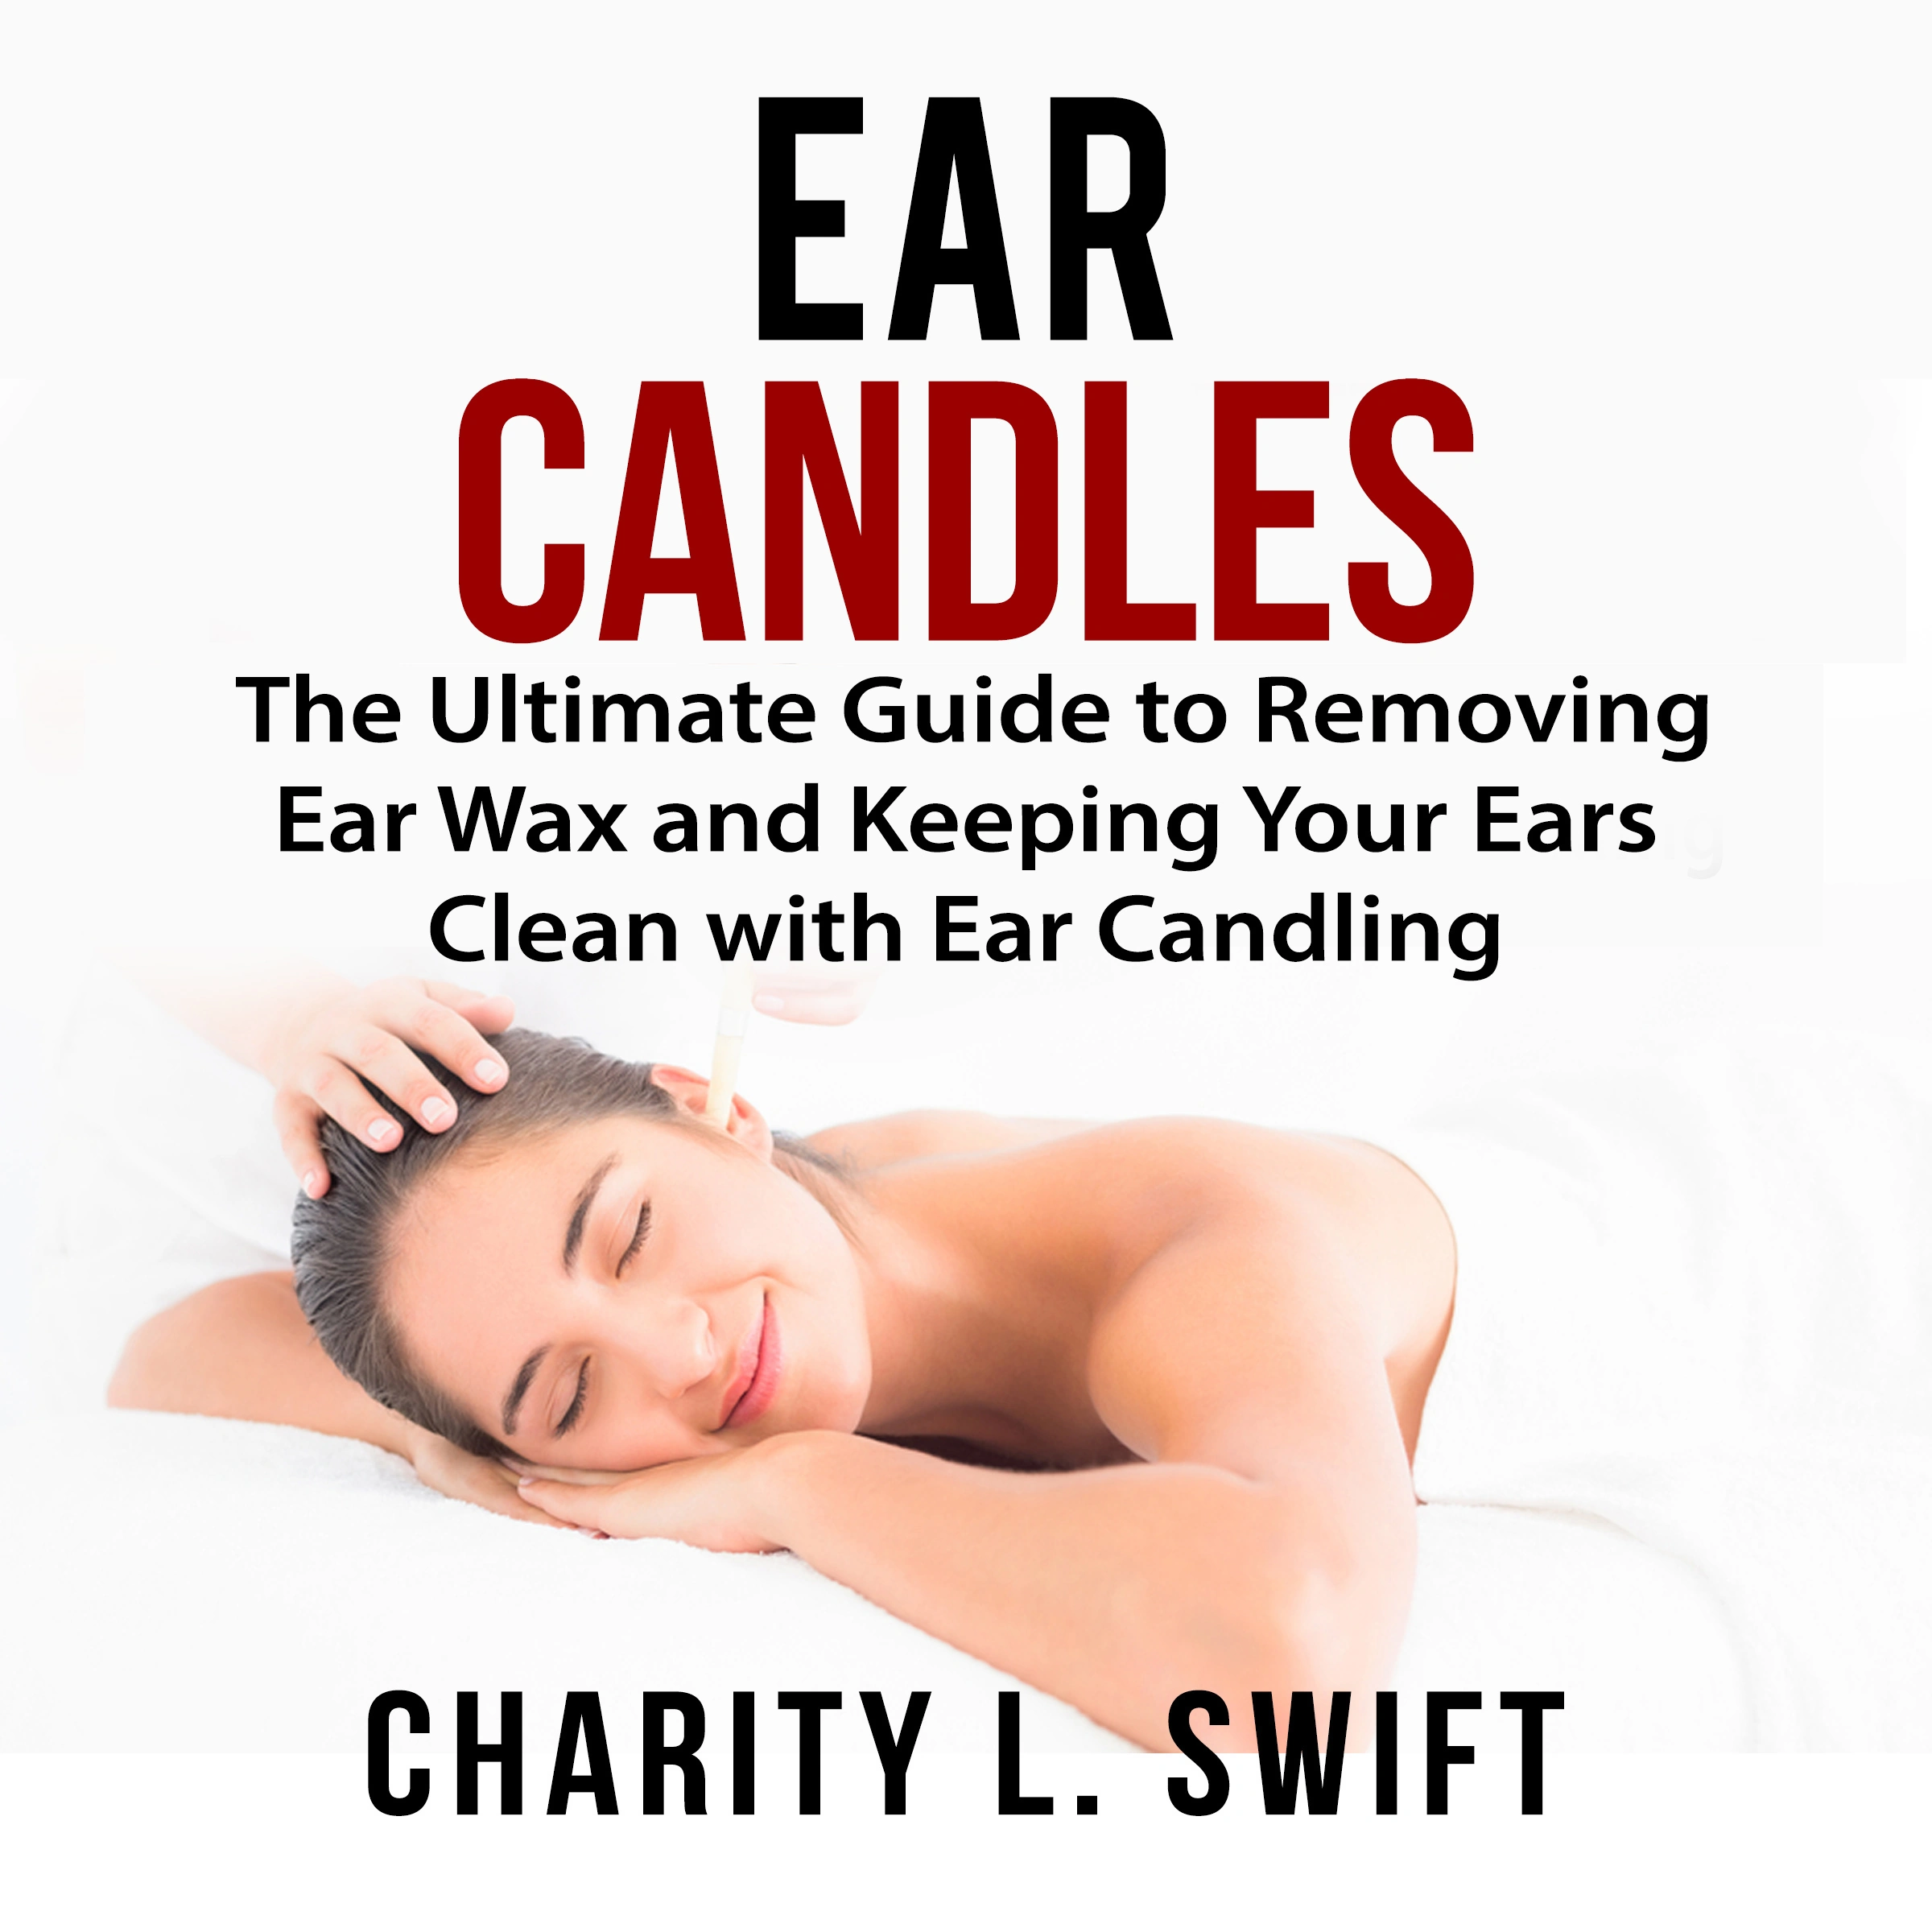 Ear Candles: The Ultimate Guide to Removing Ear Wax and Keeping Your Ears Clean with Ear Candling Audiobook by Charity L. Swift